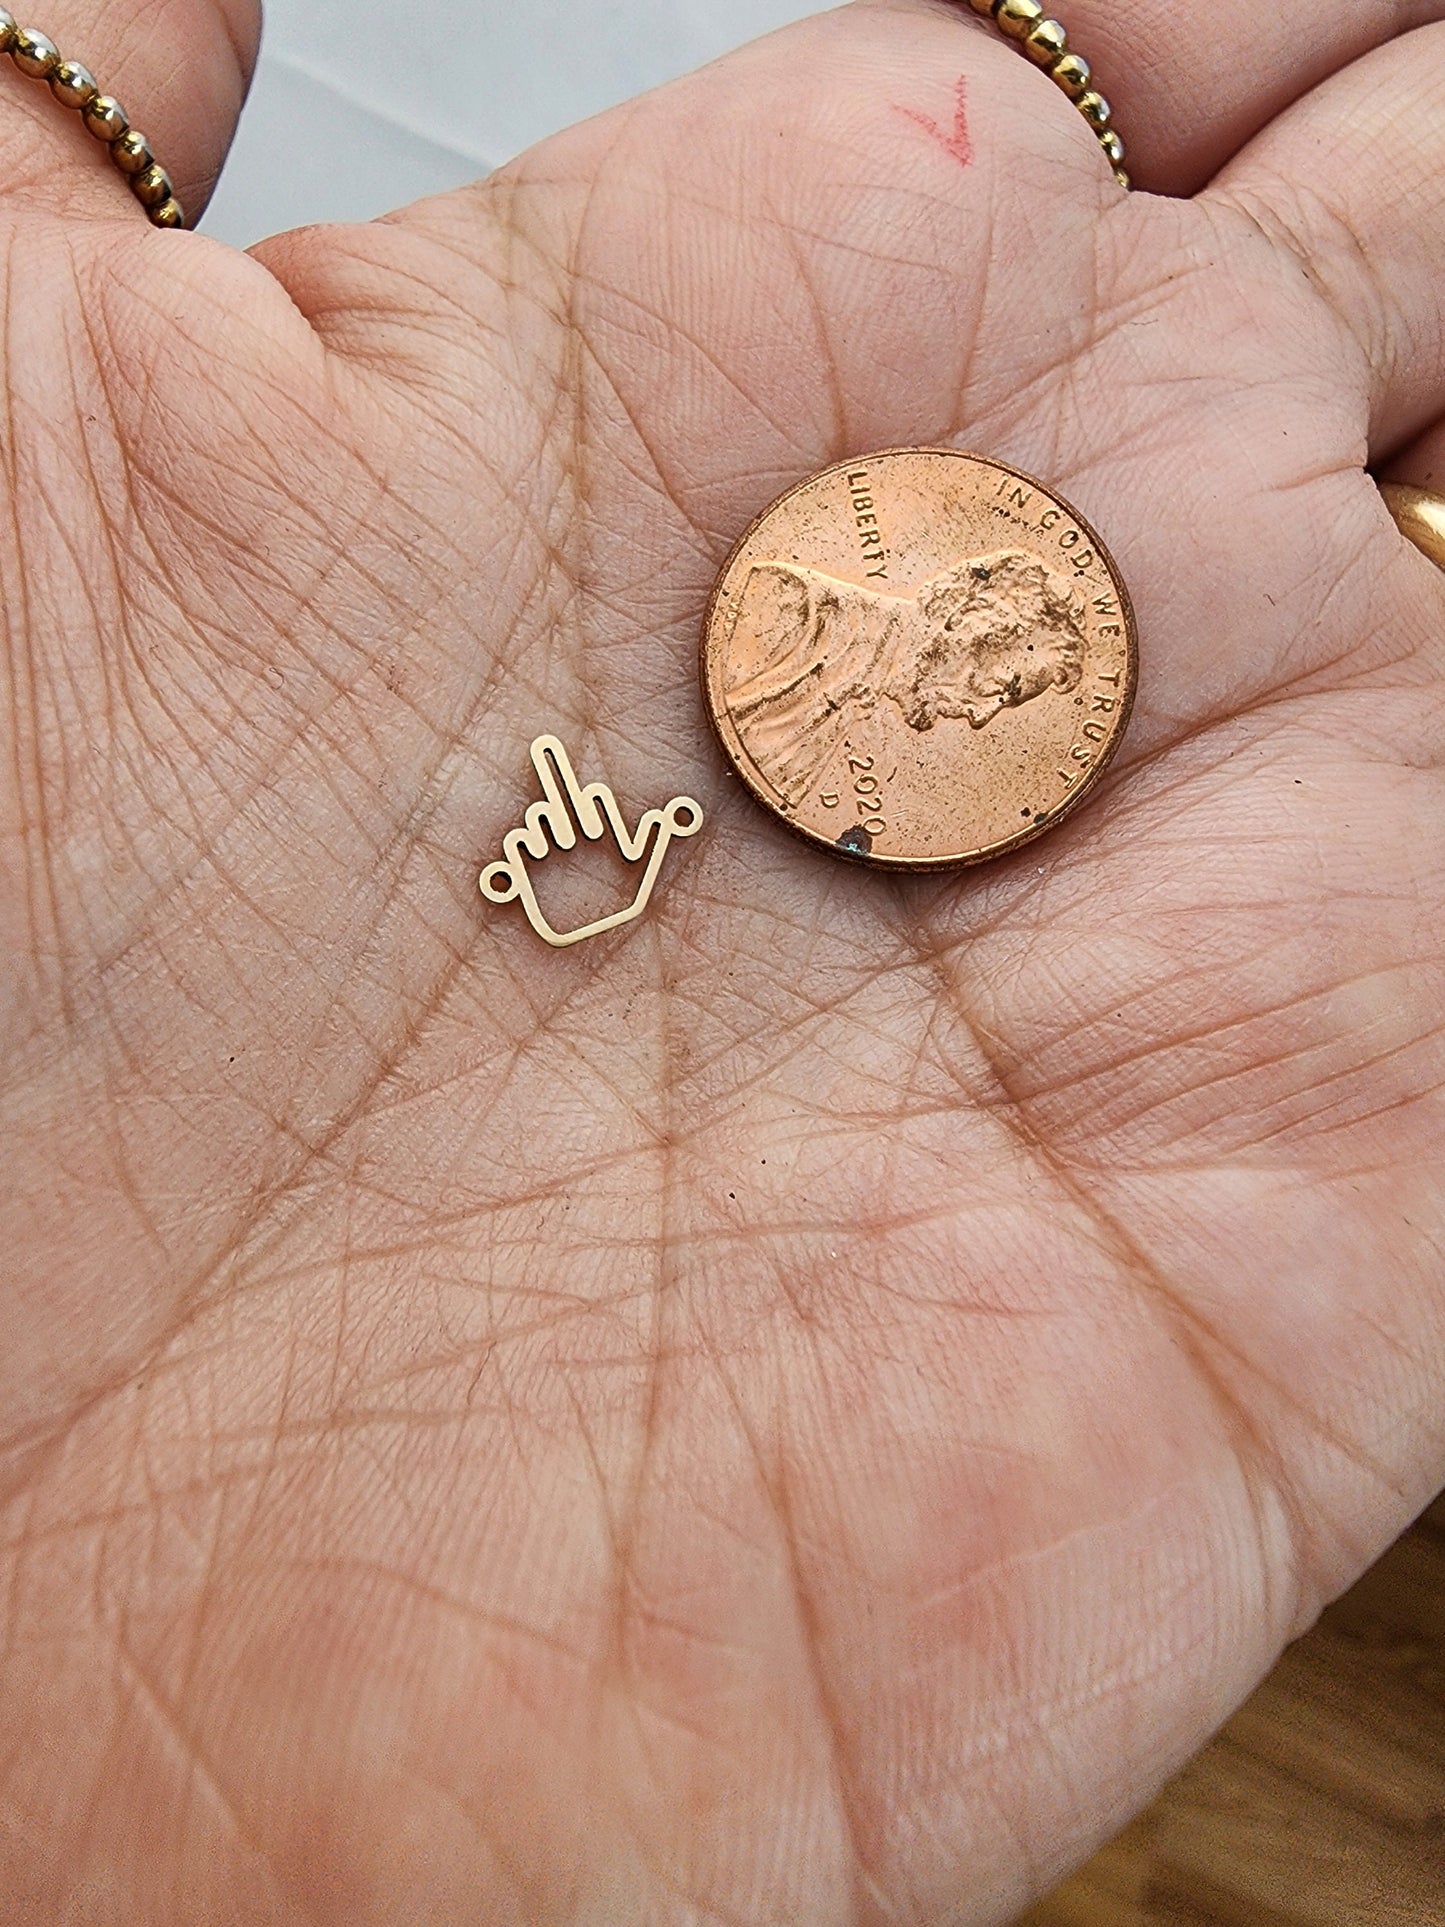 gold filled middle finger connector - sterling silver or solid gold- permanent jewelry word connectors- charm, fuck you, flip the bird